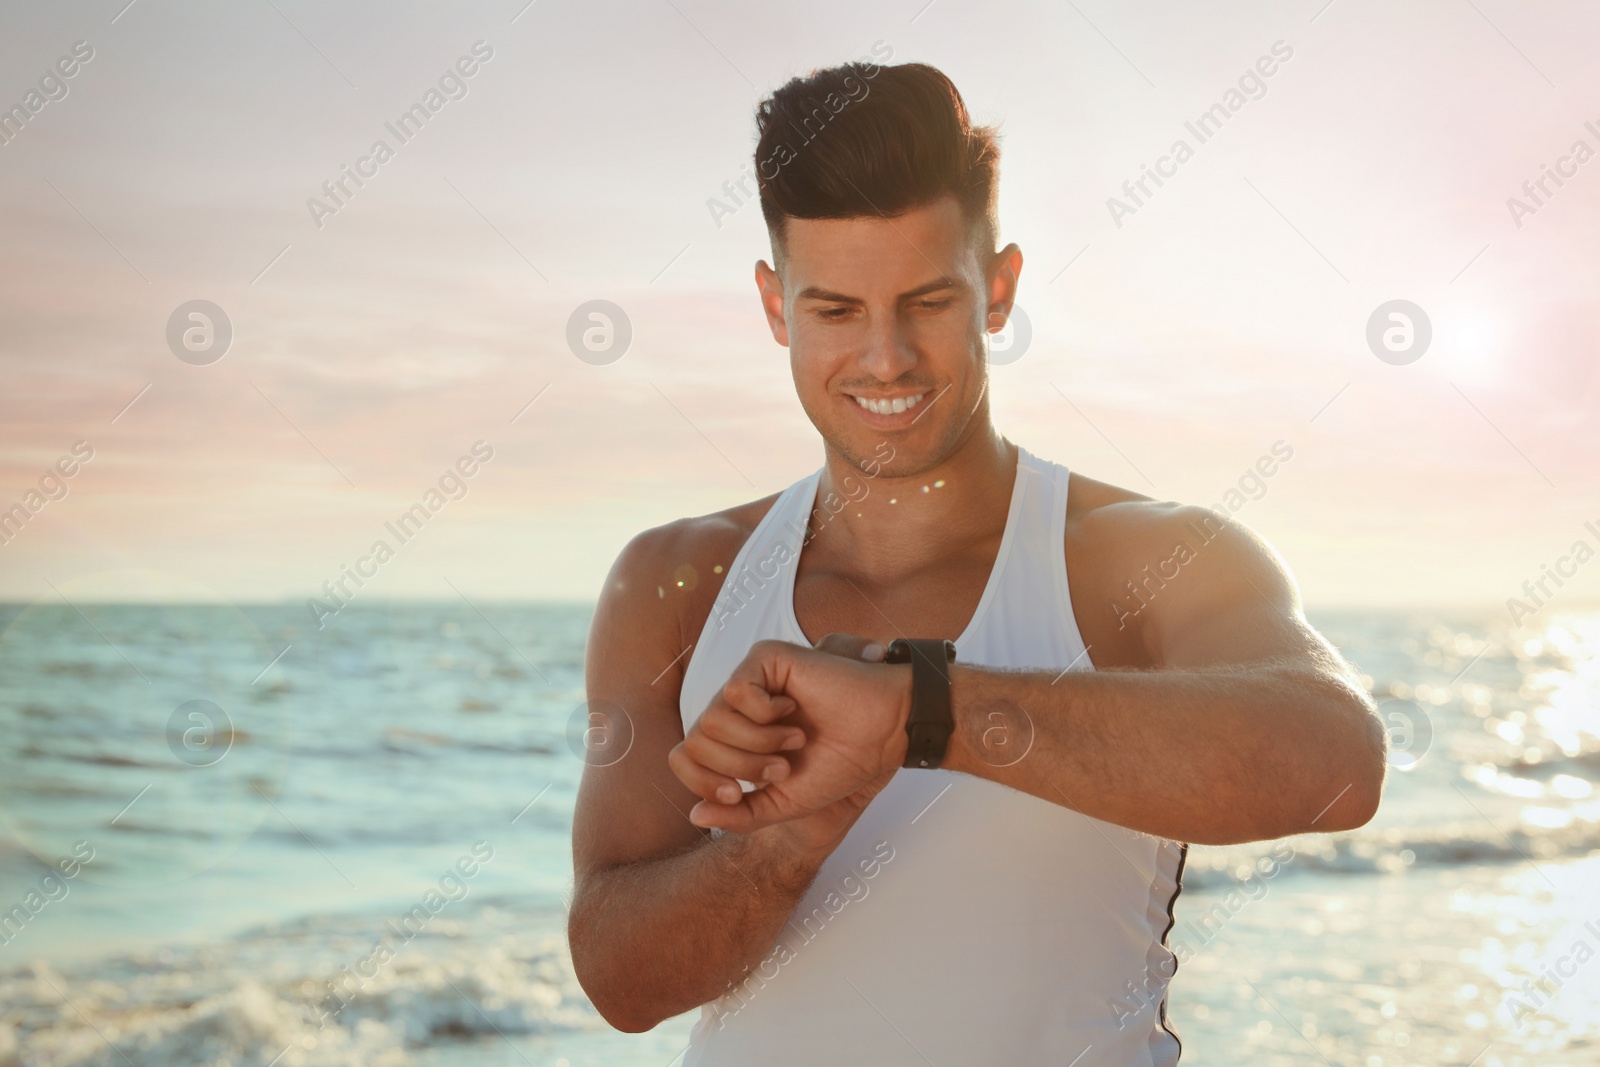 Photo of Man with athletic body checking fitness bracelet on beach